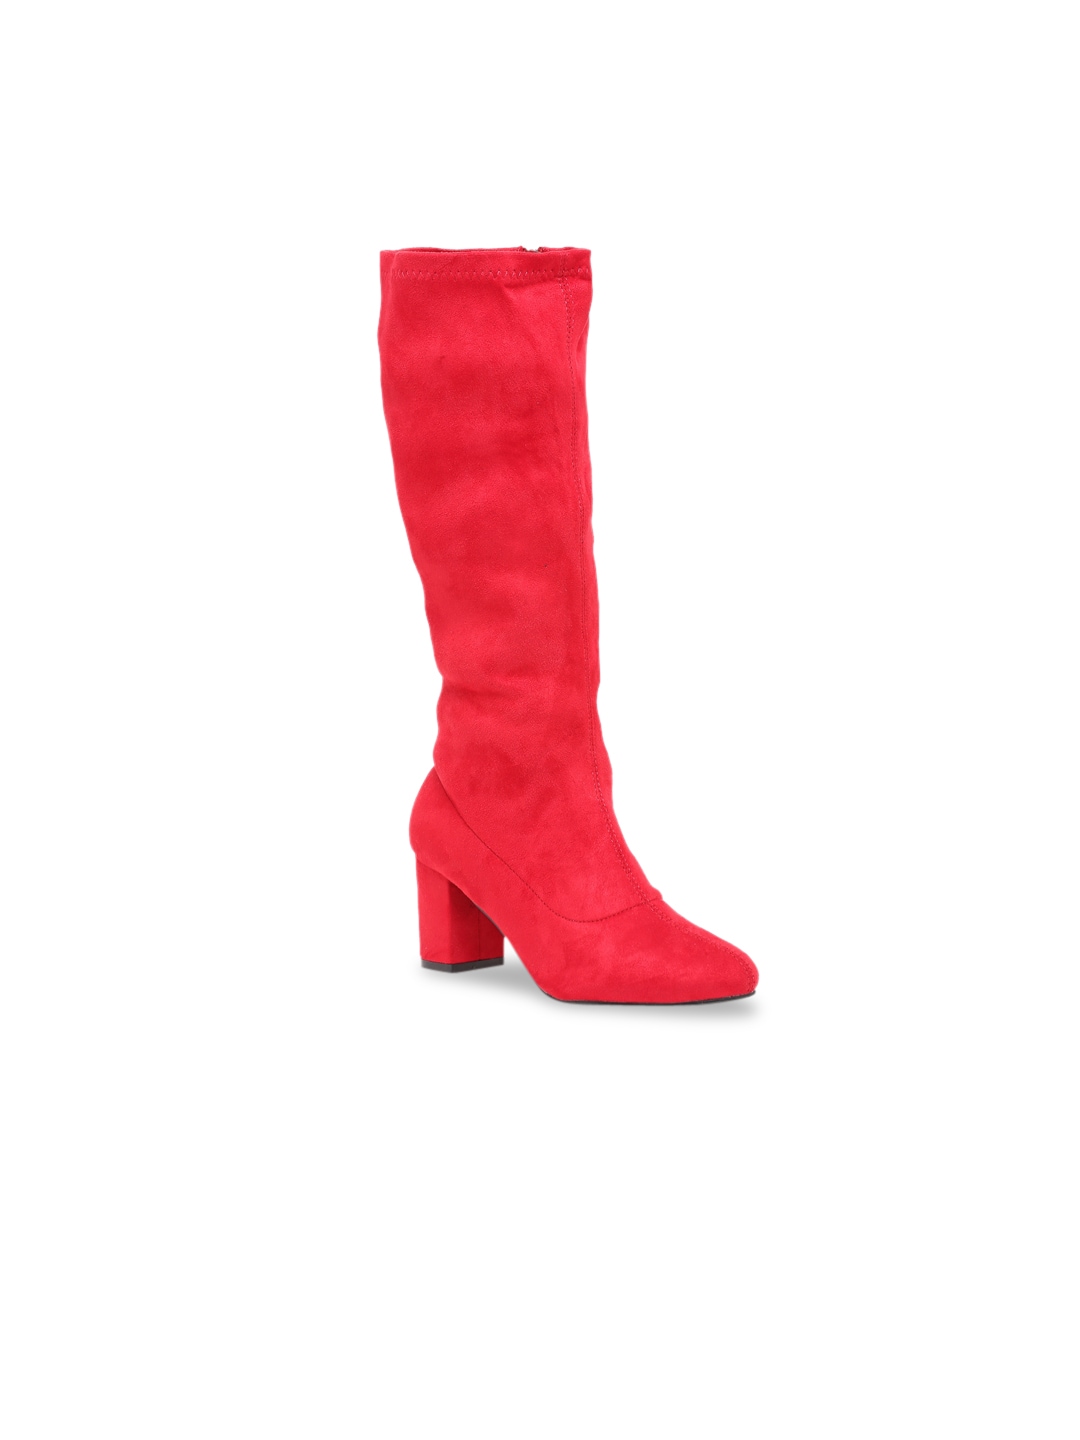 Flat n Heels Red Suede Block Heeled Boots Price in India